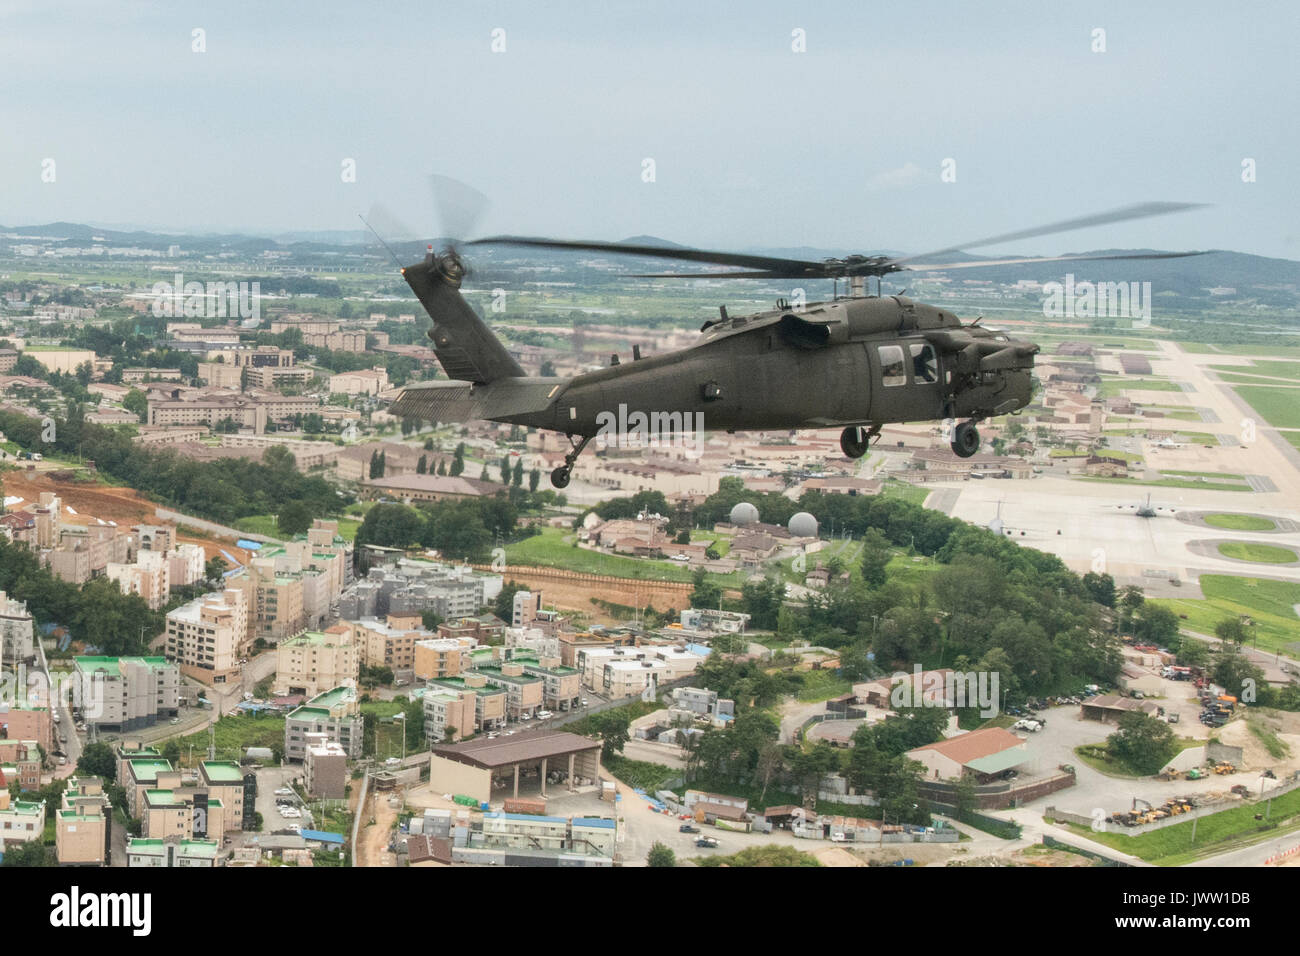 U.S. Chairman of the Joint Chiefs Gen. Joseph Dunford during an aerial tour of Camp Humphreys August 13, 2017 in Pyeongtaek, Gyeonggi-do, South Korea. Dunford is meeting military leaders in the Asia-Pacific region as tensions rise with North Korea over nuclear and ballistic missiles tests. Stock Photo